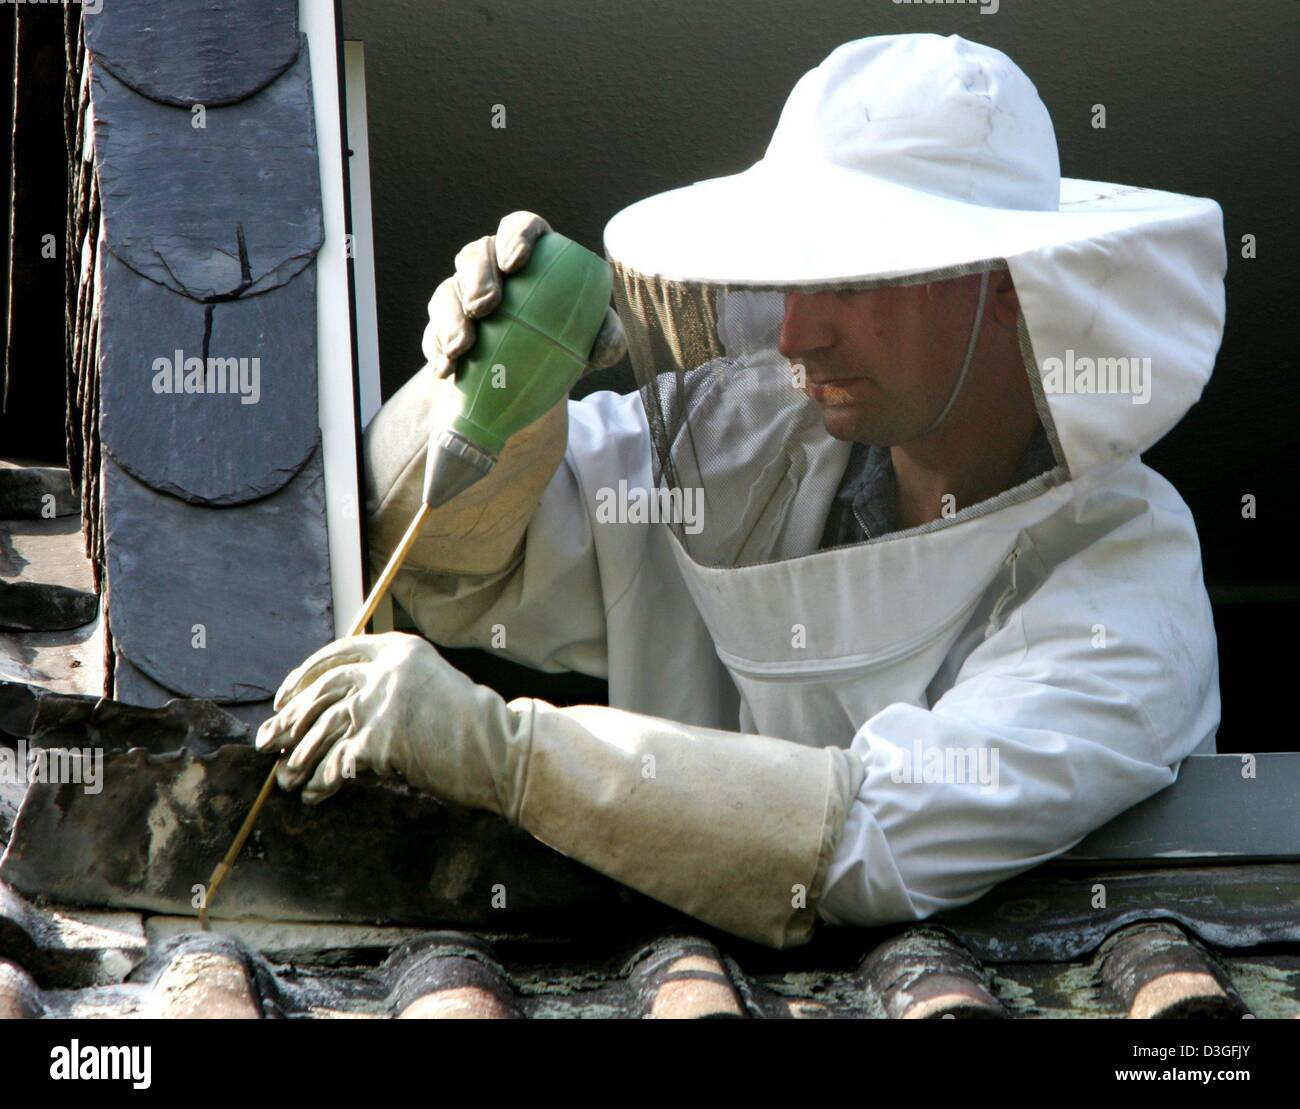 (dpa) - Exterminator Dirk Kemmerling injects a poisonous substance into the opening of a wasp's nest in the roof of a house in Duesseldorf, Germany, 7 September 2004. Because of the hot summer in 2003 and the following mild winter many wasp queens survived. This has led to a steep increase in the wasp population in Germany which has turned into a plague. Stock Photo